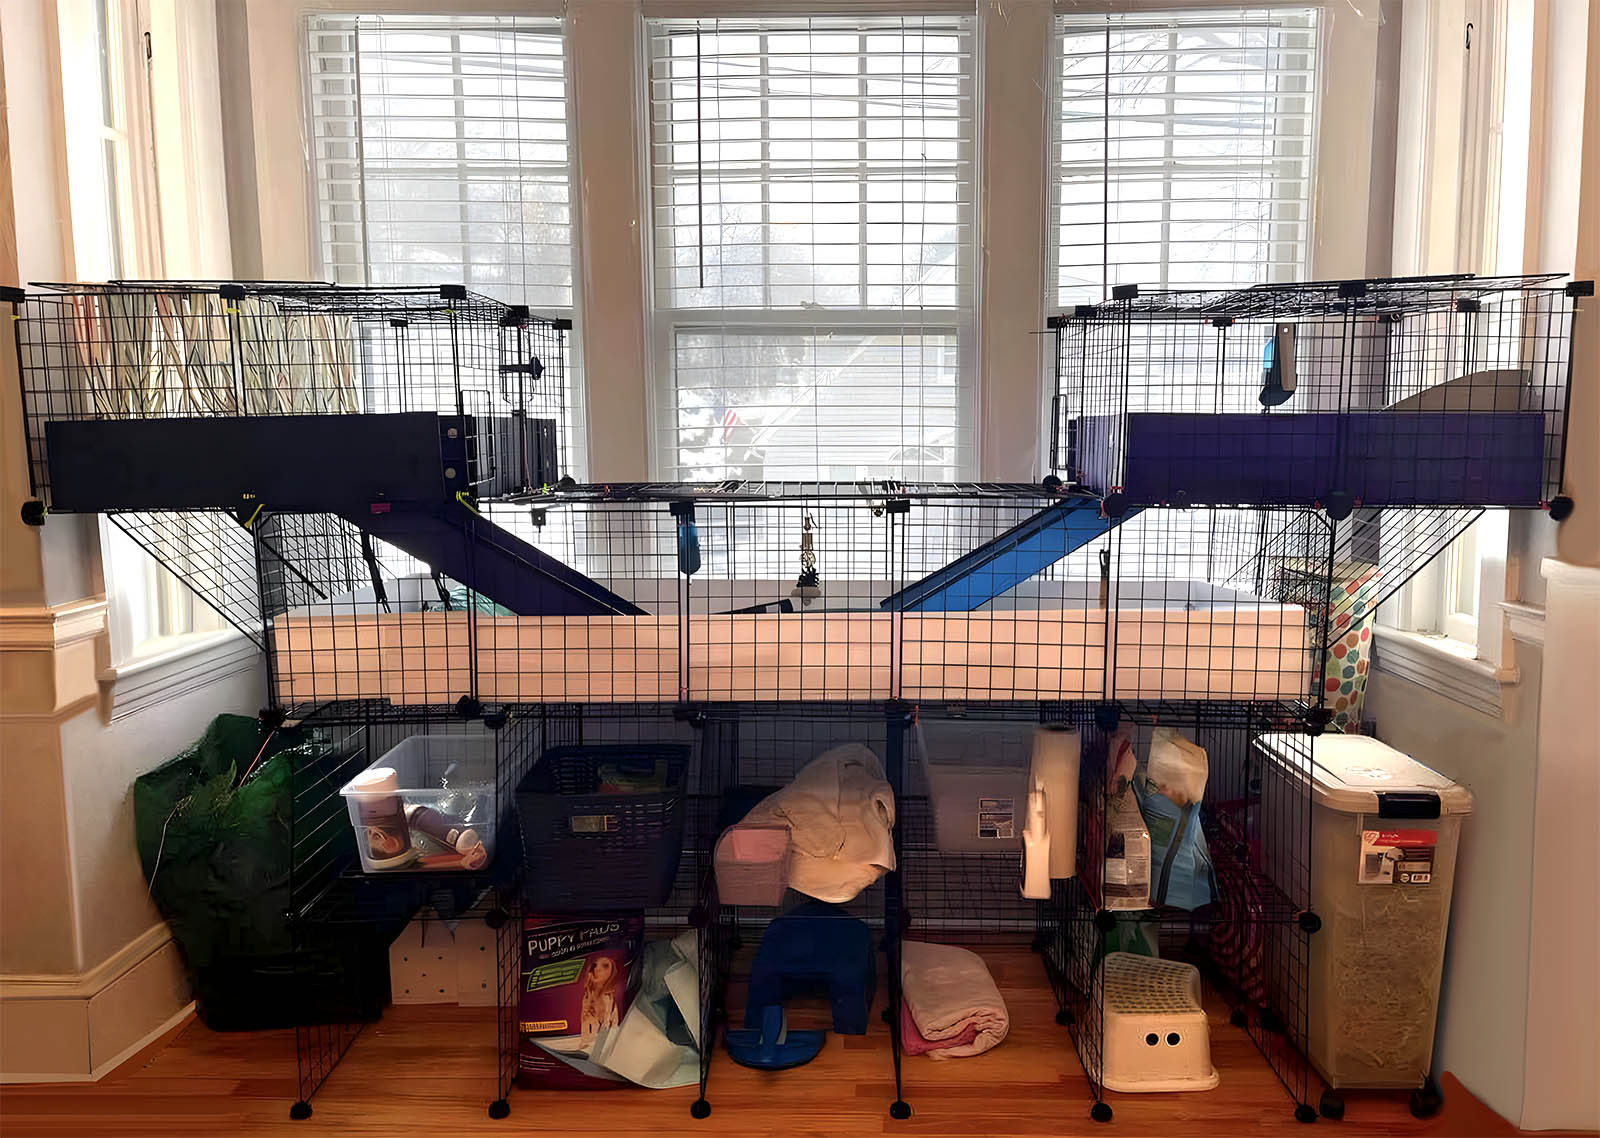 15 DIY Guinea Pig Cage Plans You Can Build Today (With Pictures